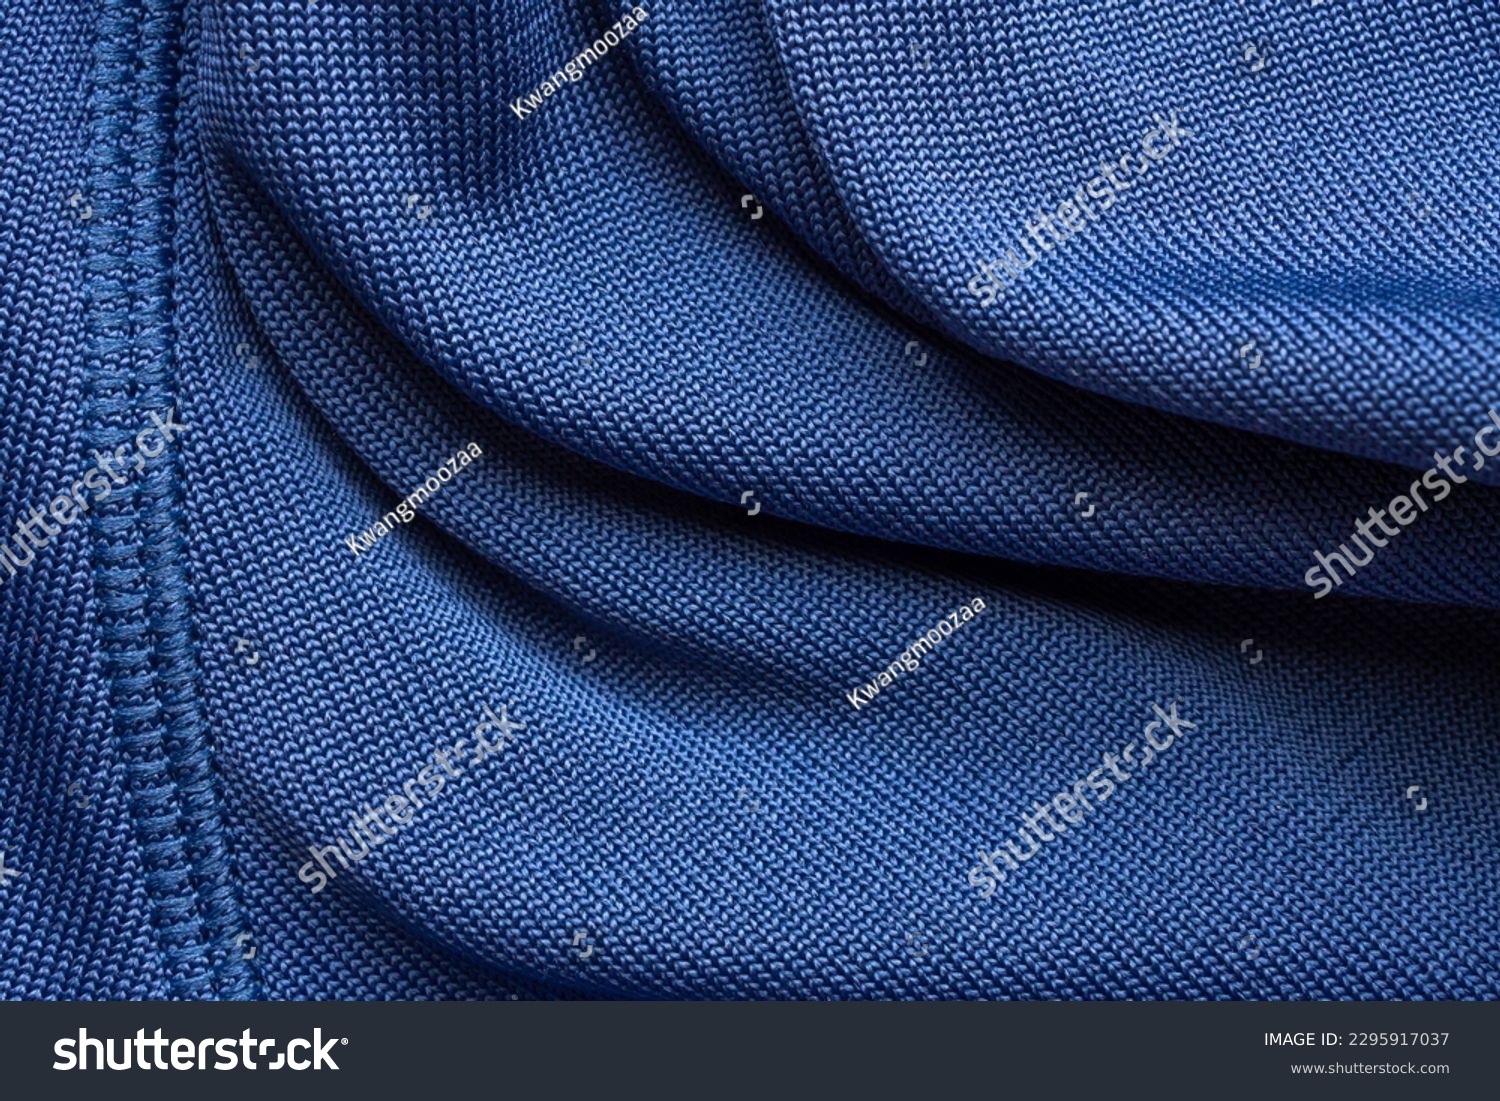 Blue sports clothing fabric football shirt jersey texture with stitches #2295917037